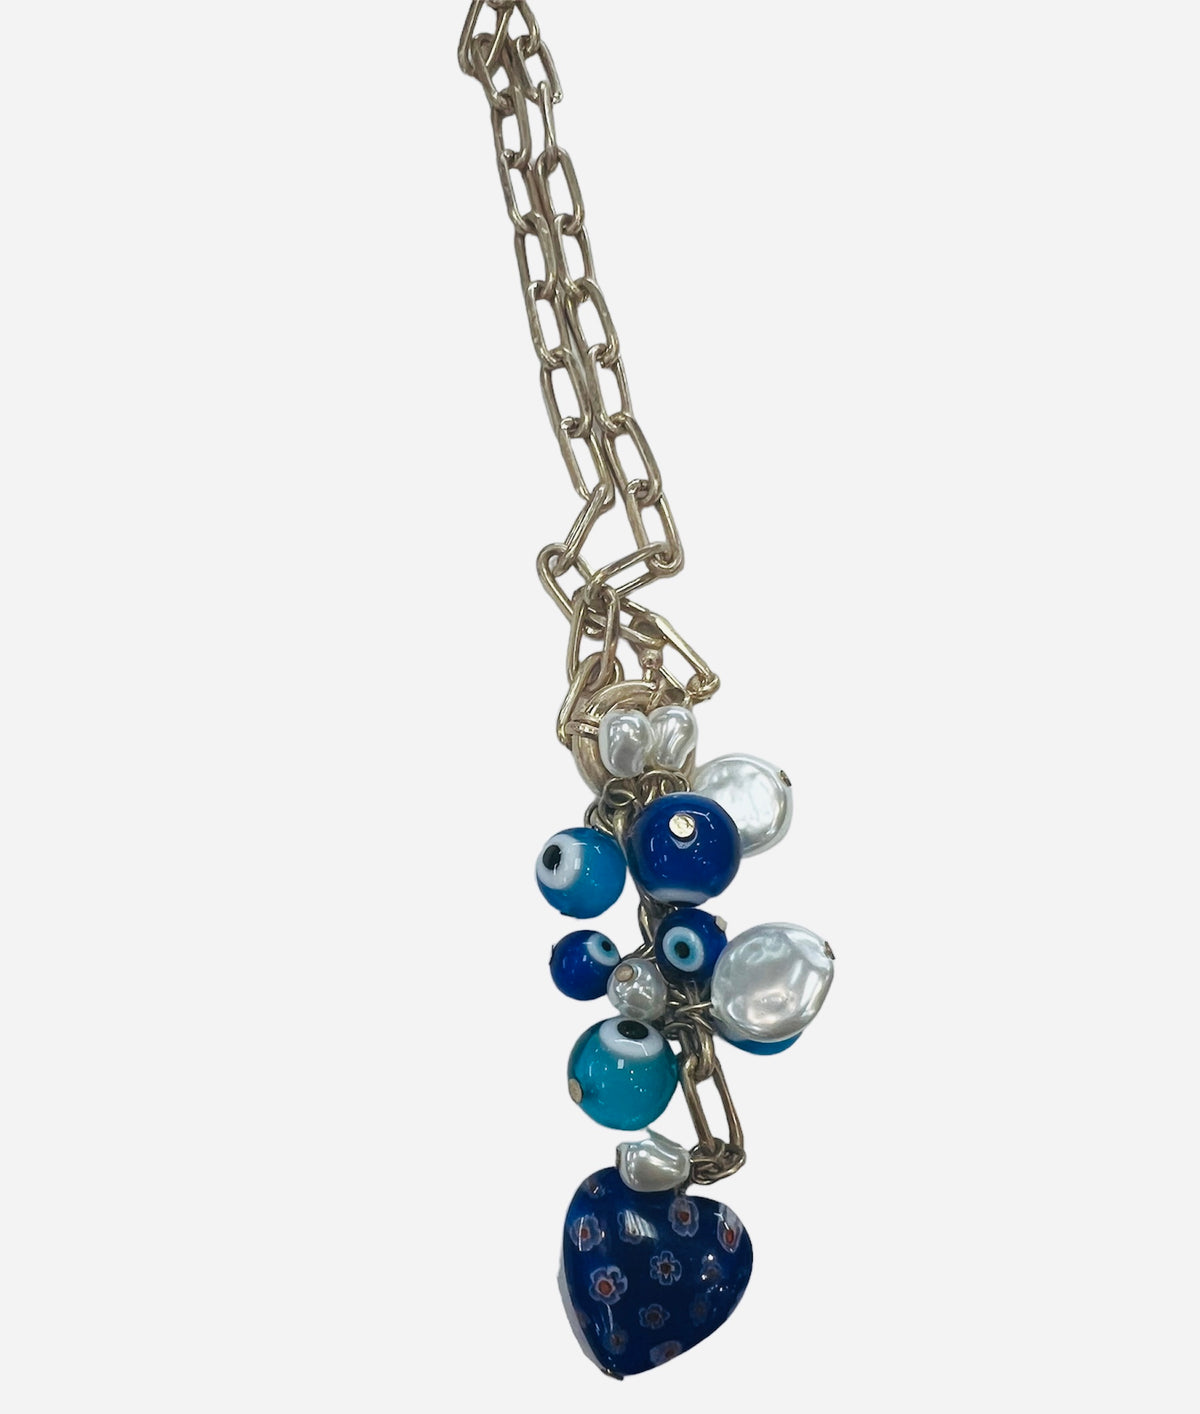 FJC Gold Chain, Freshwater Pearl & Blue Glass CHarm